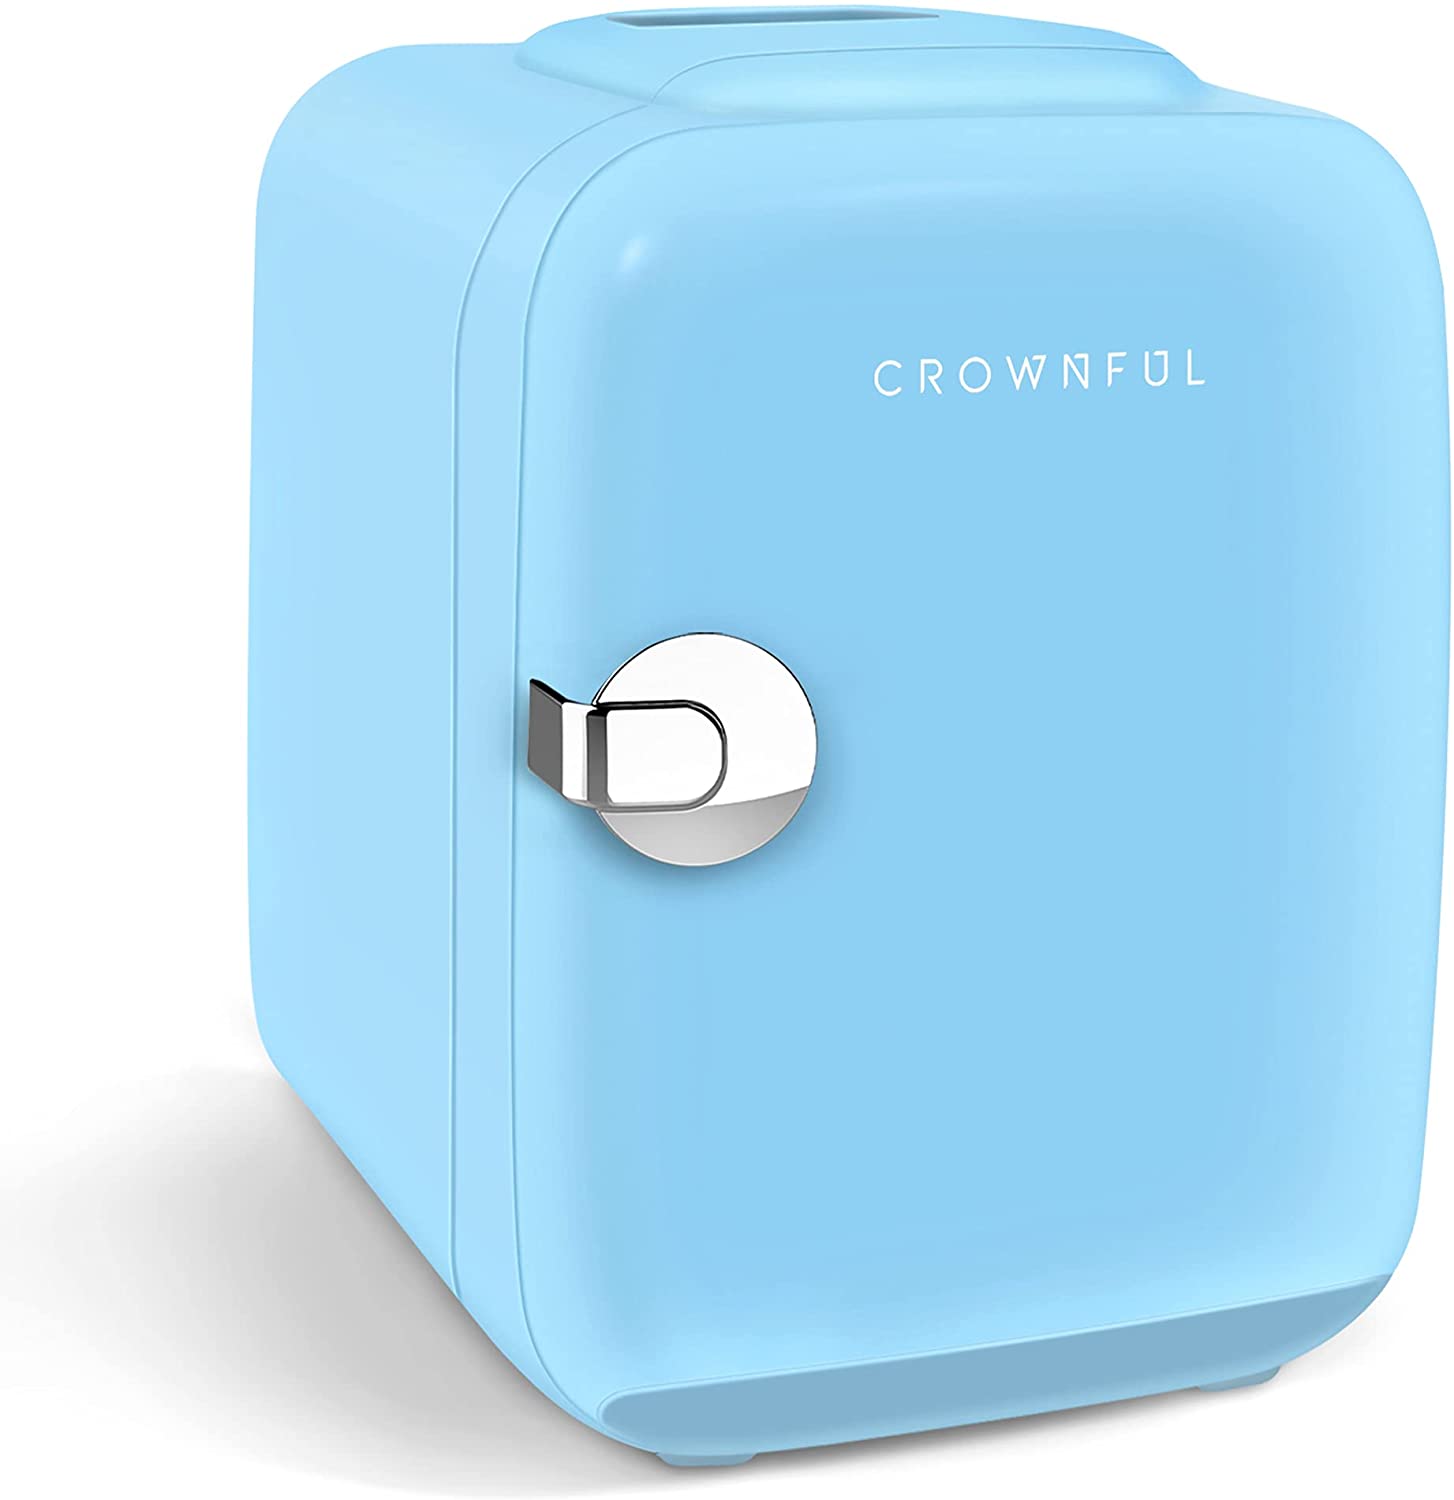 CROWNFUL Mini Fridge, 4 Liter/6 Can Portable Cooler And Warmer Personal Fridge For Skin Care, Cosmetics, Food, Great for Bedroom, Office, Car, Dorm, ETL Listed (Blue)